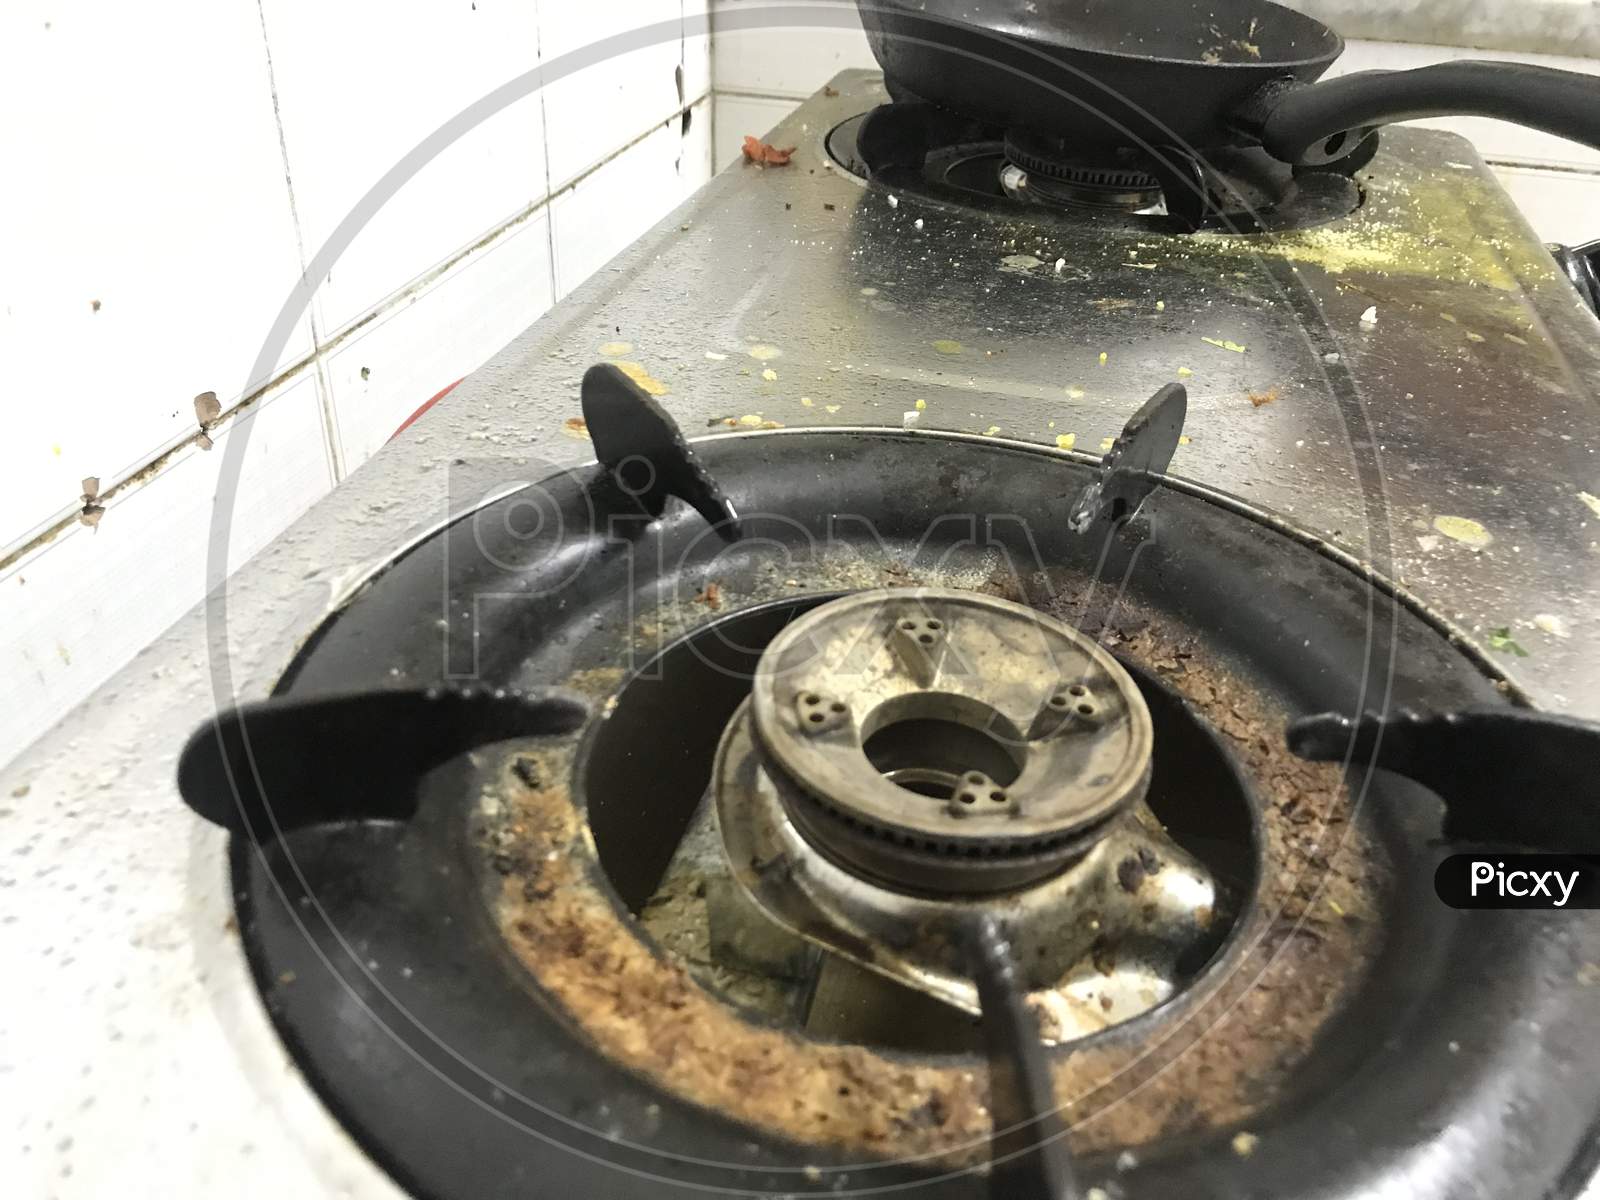 Uncleaned And Food Waste Scattered Over The Surface Of The Stainless Steel Finished Gas Stoves